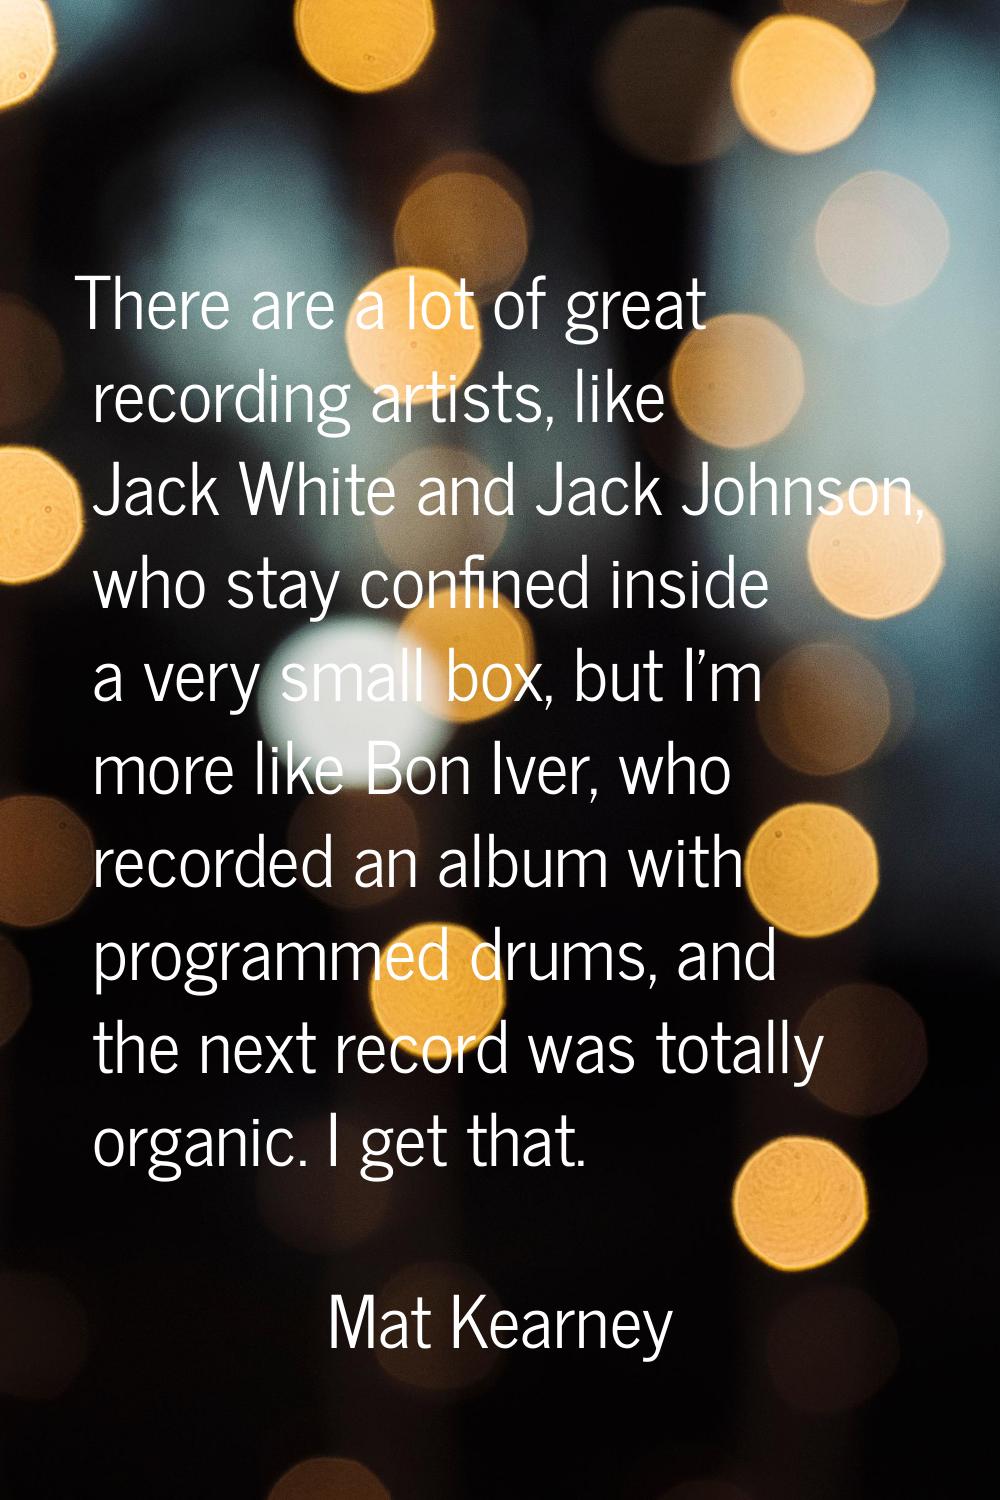 There are a lot of great recording artists, like Jack White and Jack Johnson, who stay confined ins